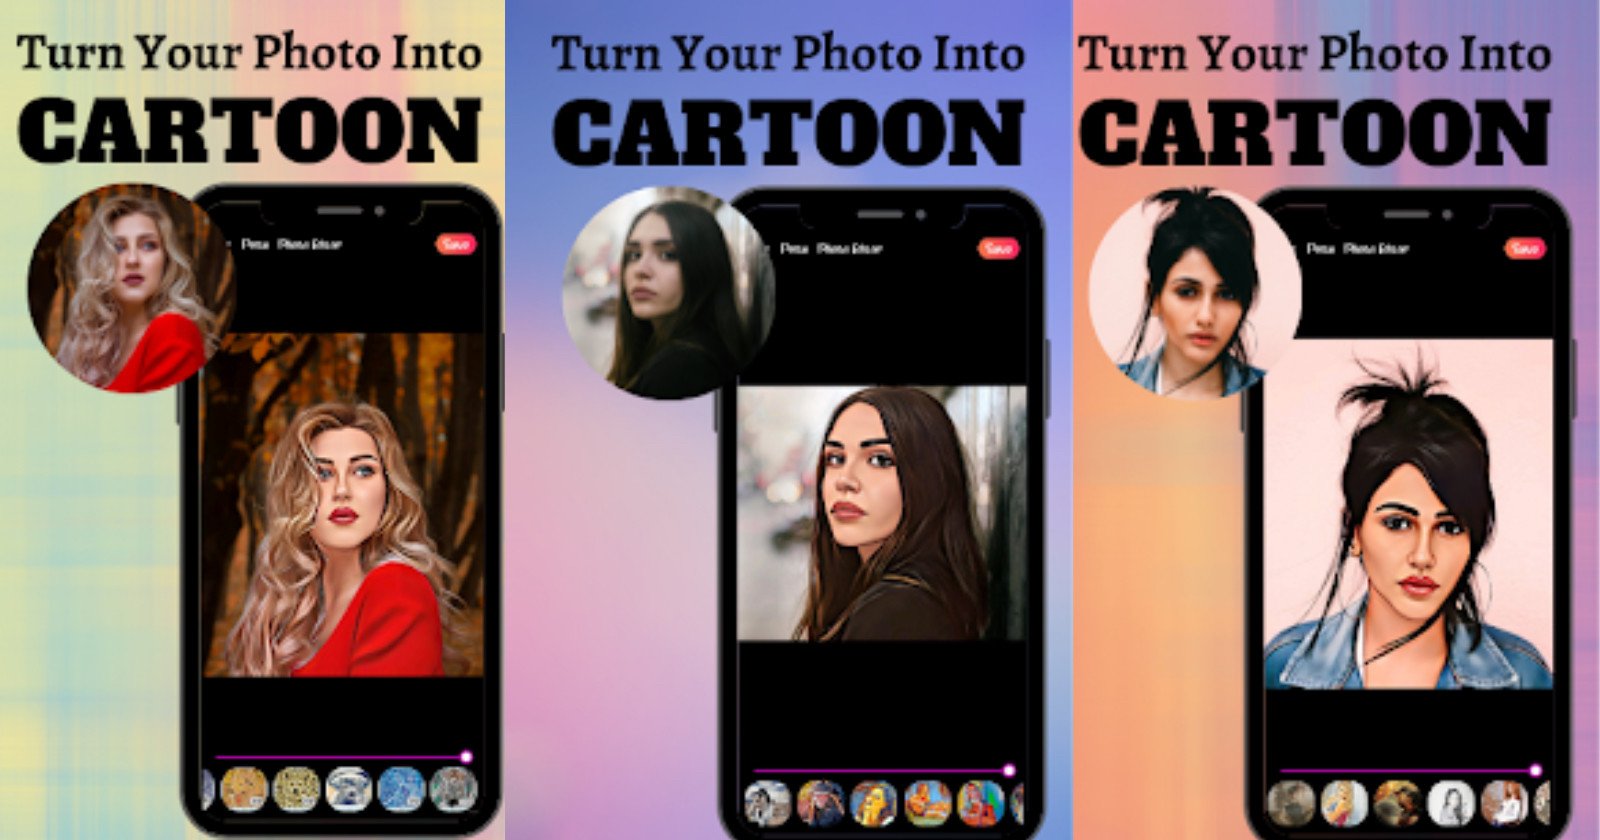  photo editing apps are being targeted cyber criminals 